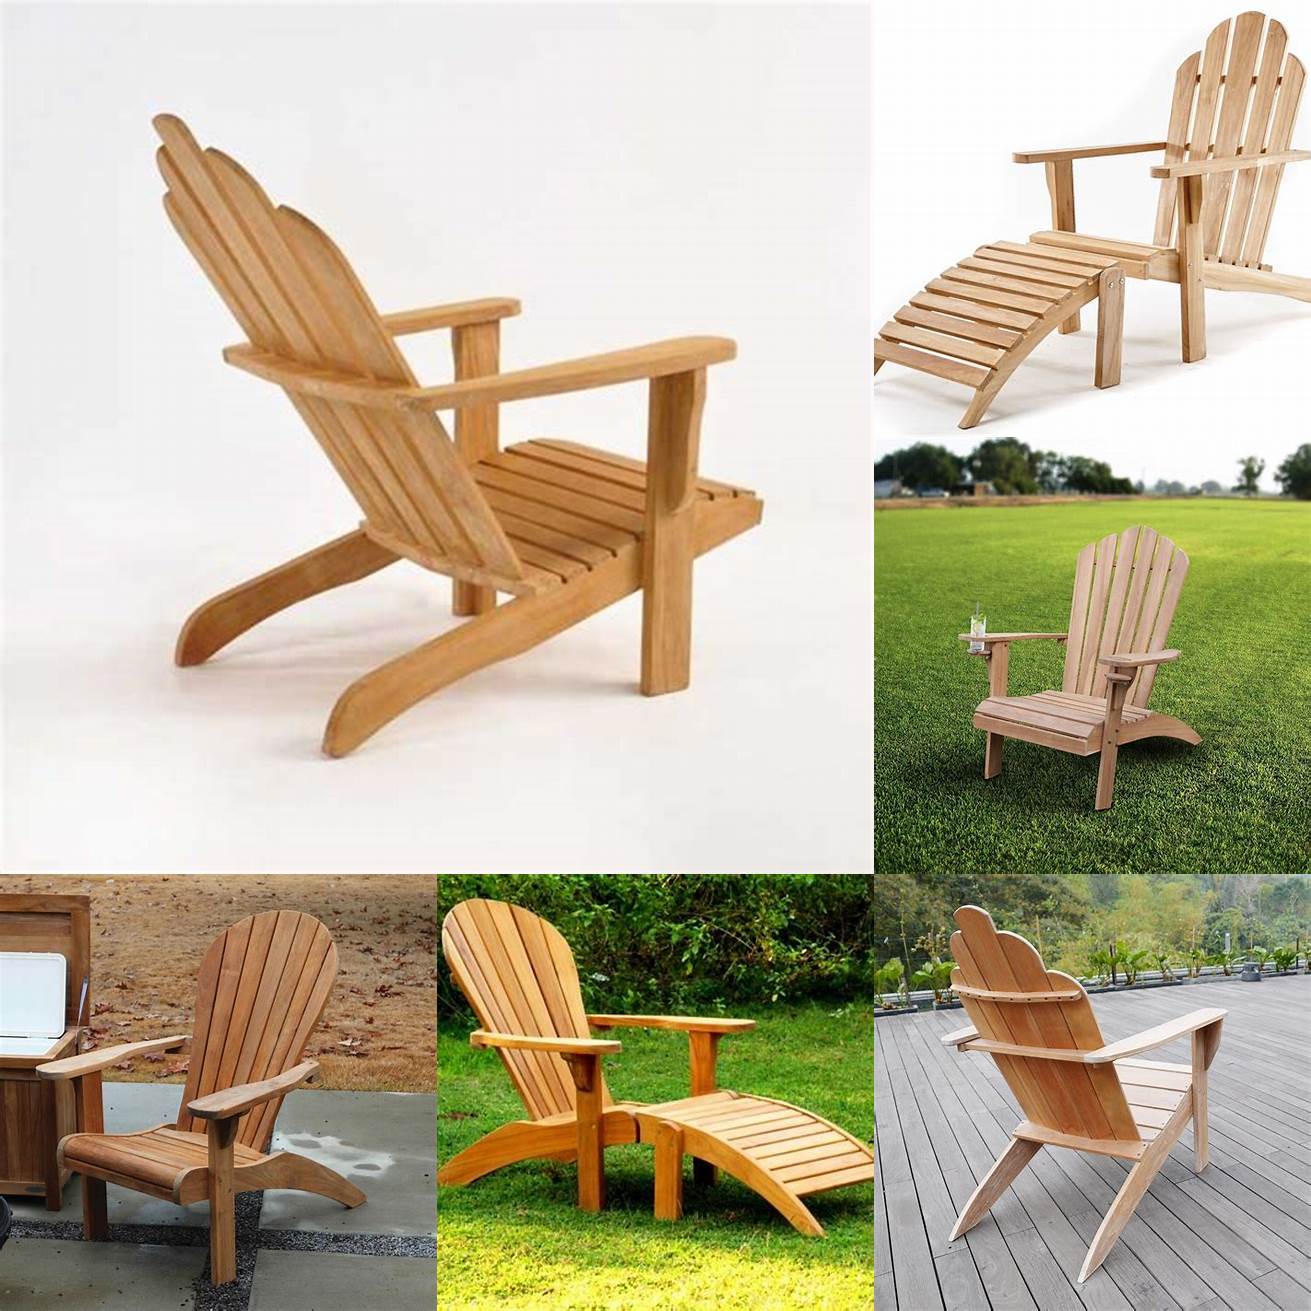 Teak Adirondack Chairs for Relaxing